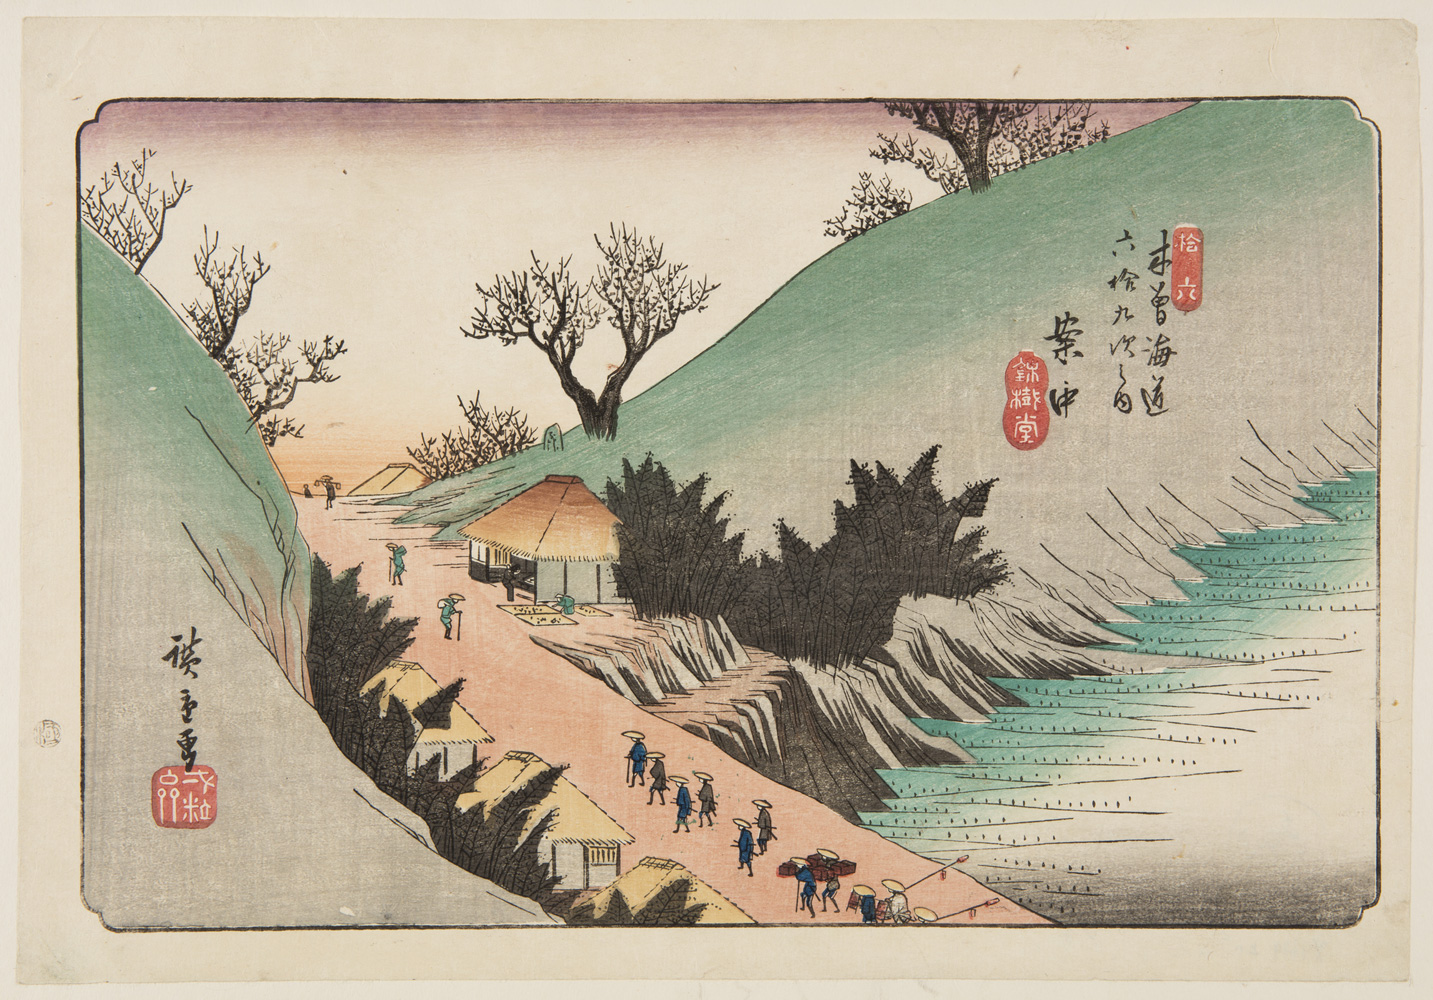 Japanese print of a mountain road. Travelers walk along the road, in traditional clothes. The road has small buildings either side.